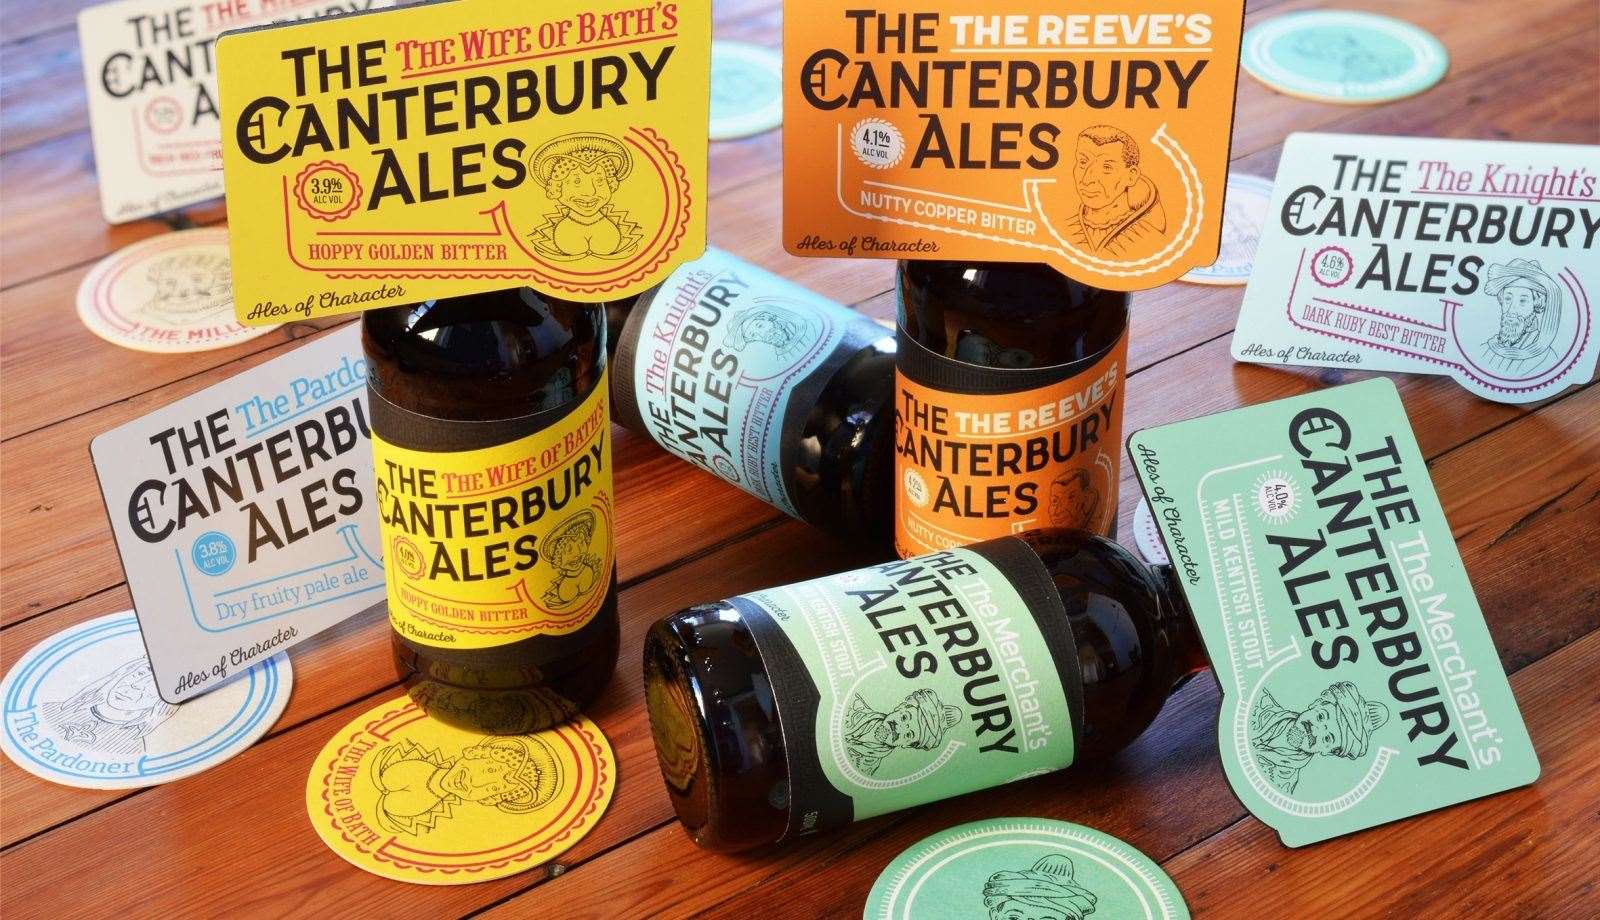 Taking place on September 21st, The Canterbury Ales are to host a special evening of brewing history, references to Ale in medieval England and lots of delicious tasting.